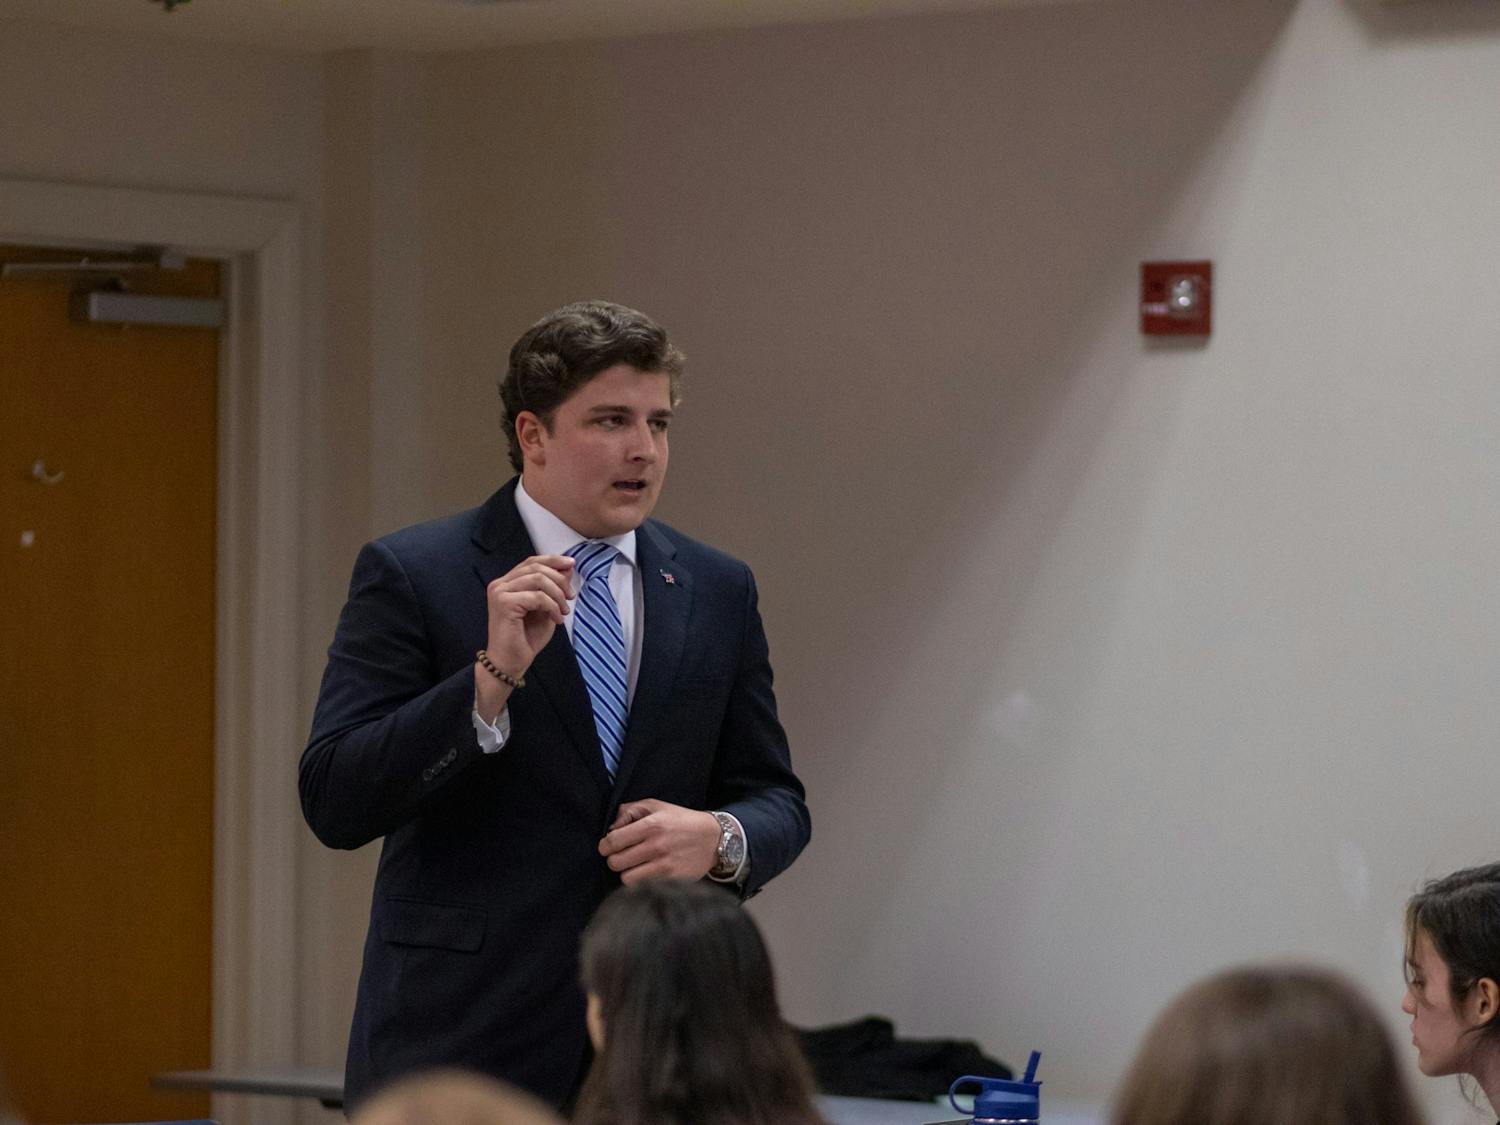 Student Body President candidate Sam Robinson speaks to the crowd of students at UNC-CH's Young Democrat's SBP Town Hall on Feb. 7. 2023.